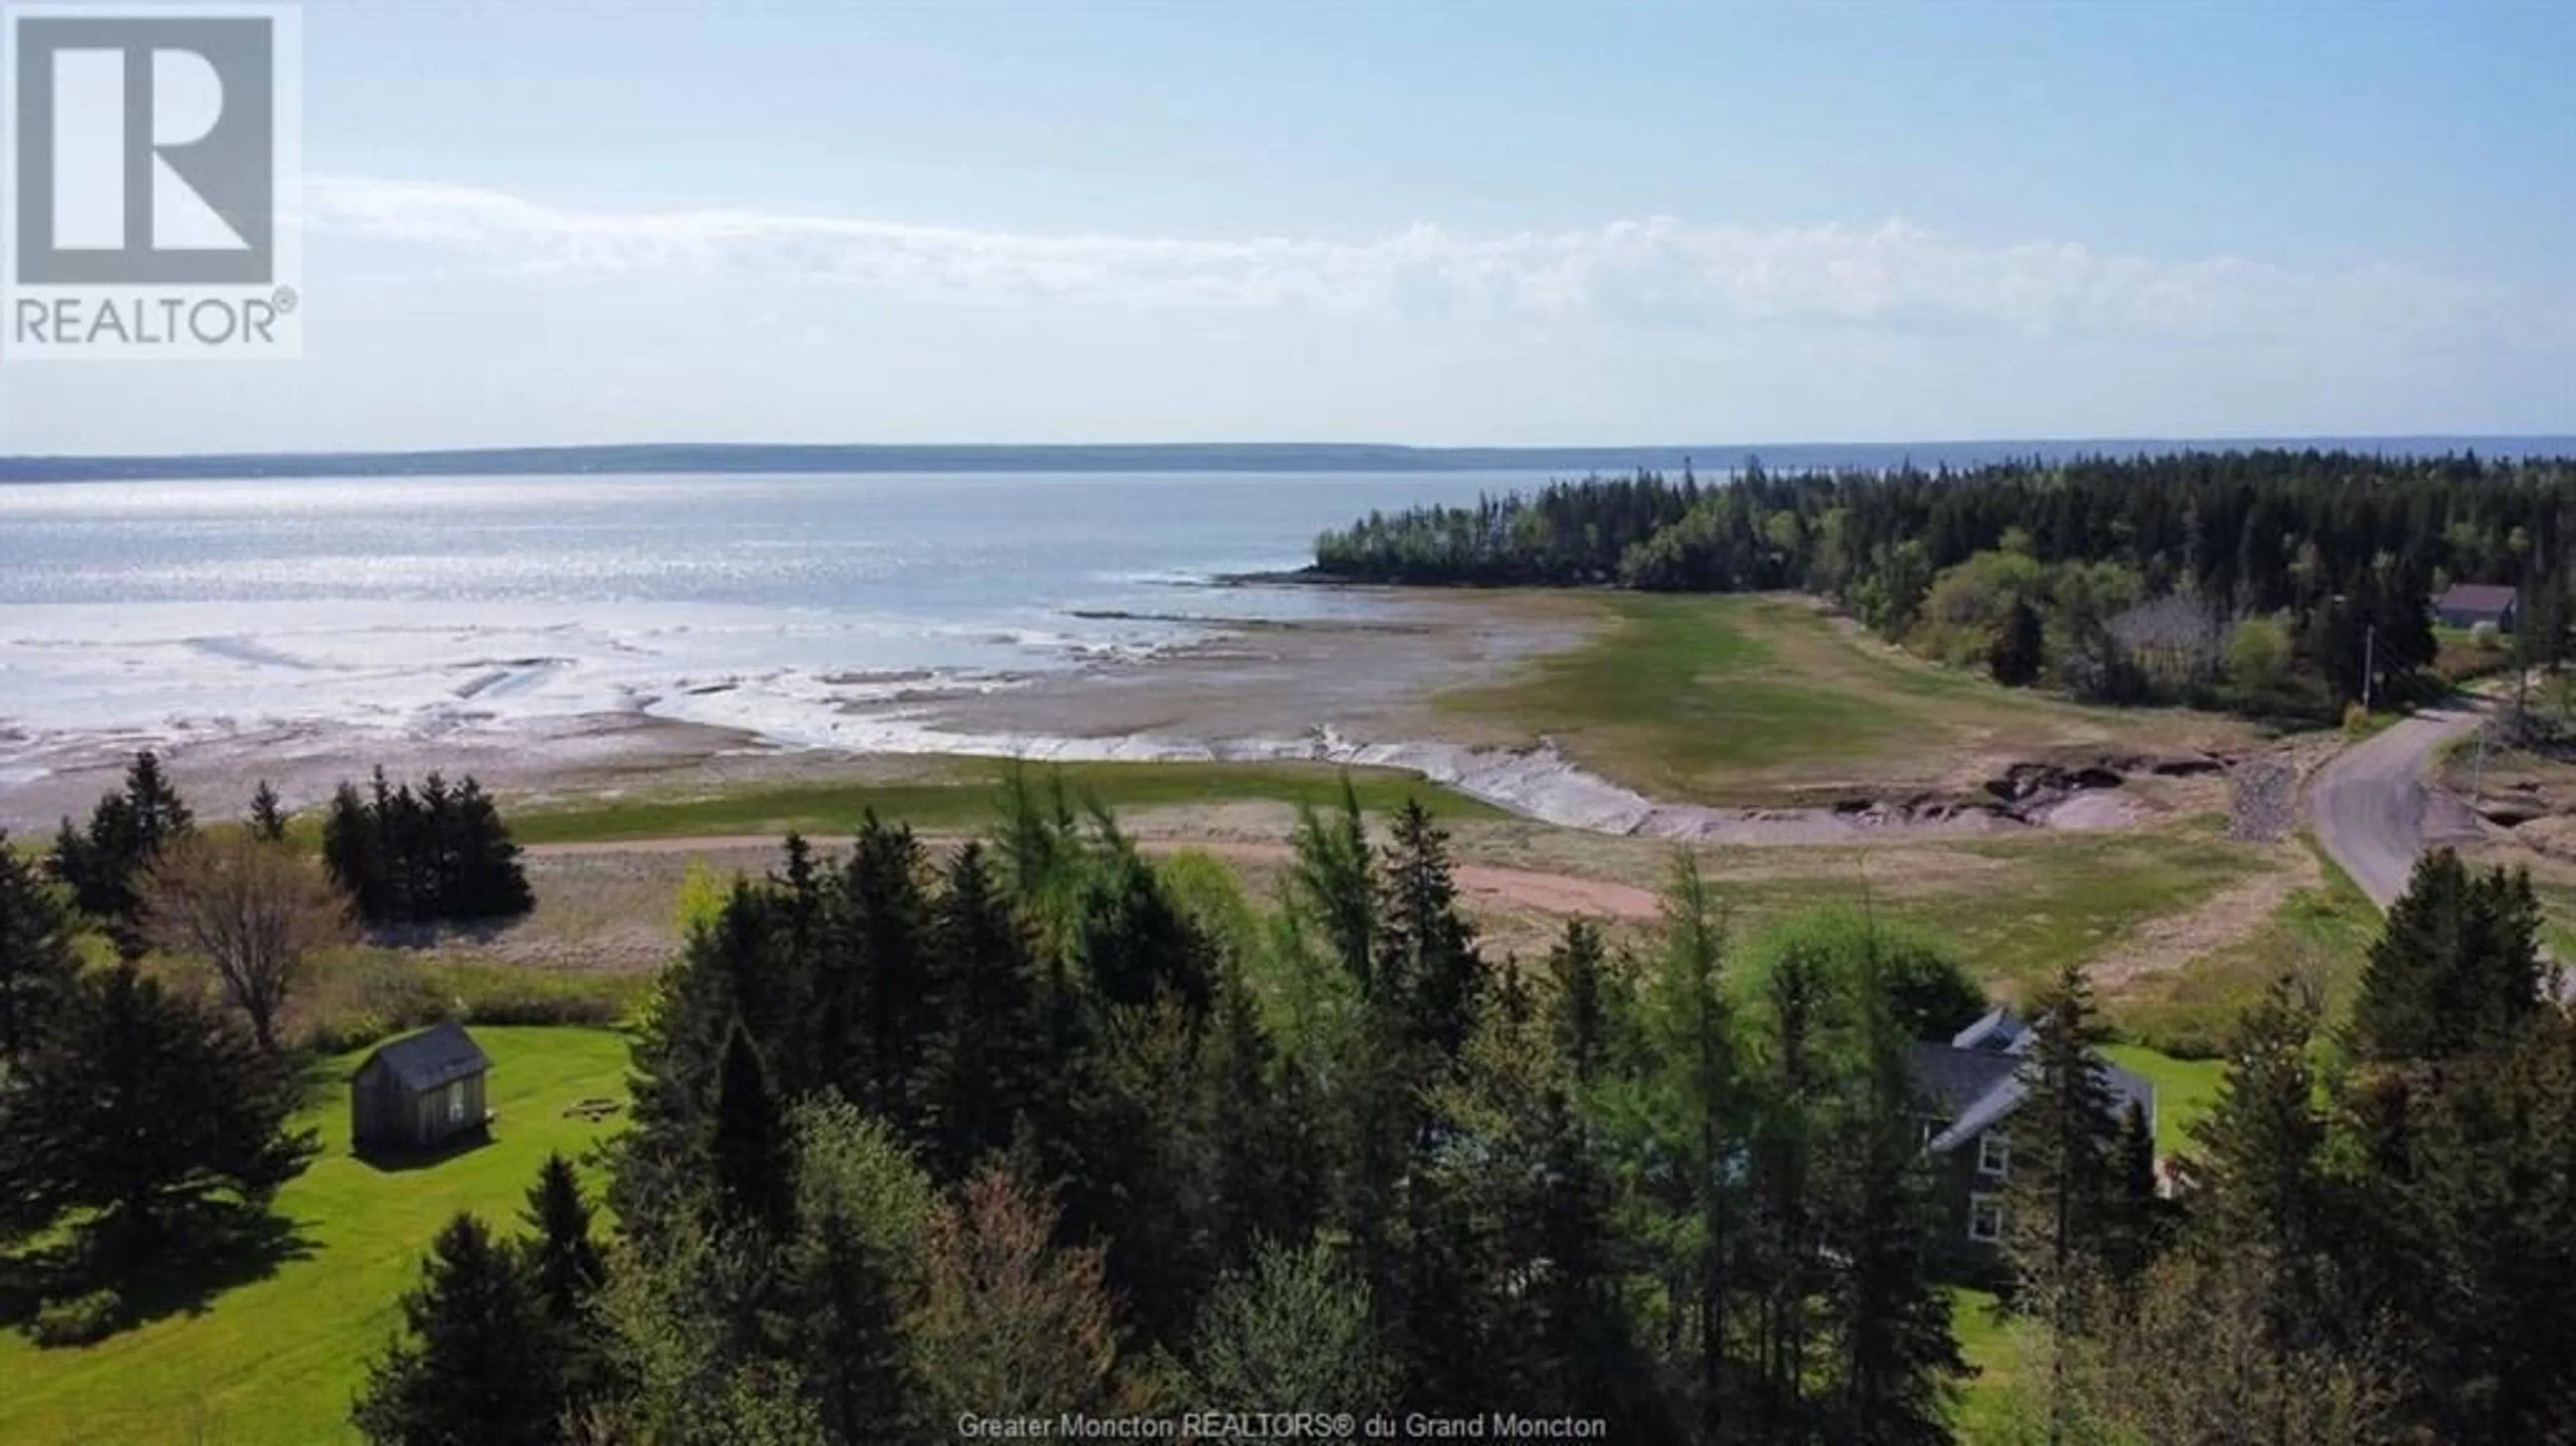 Lakeview for 366 Lower Rockport RD, Rockport New Brunswick E4K3L9